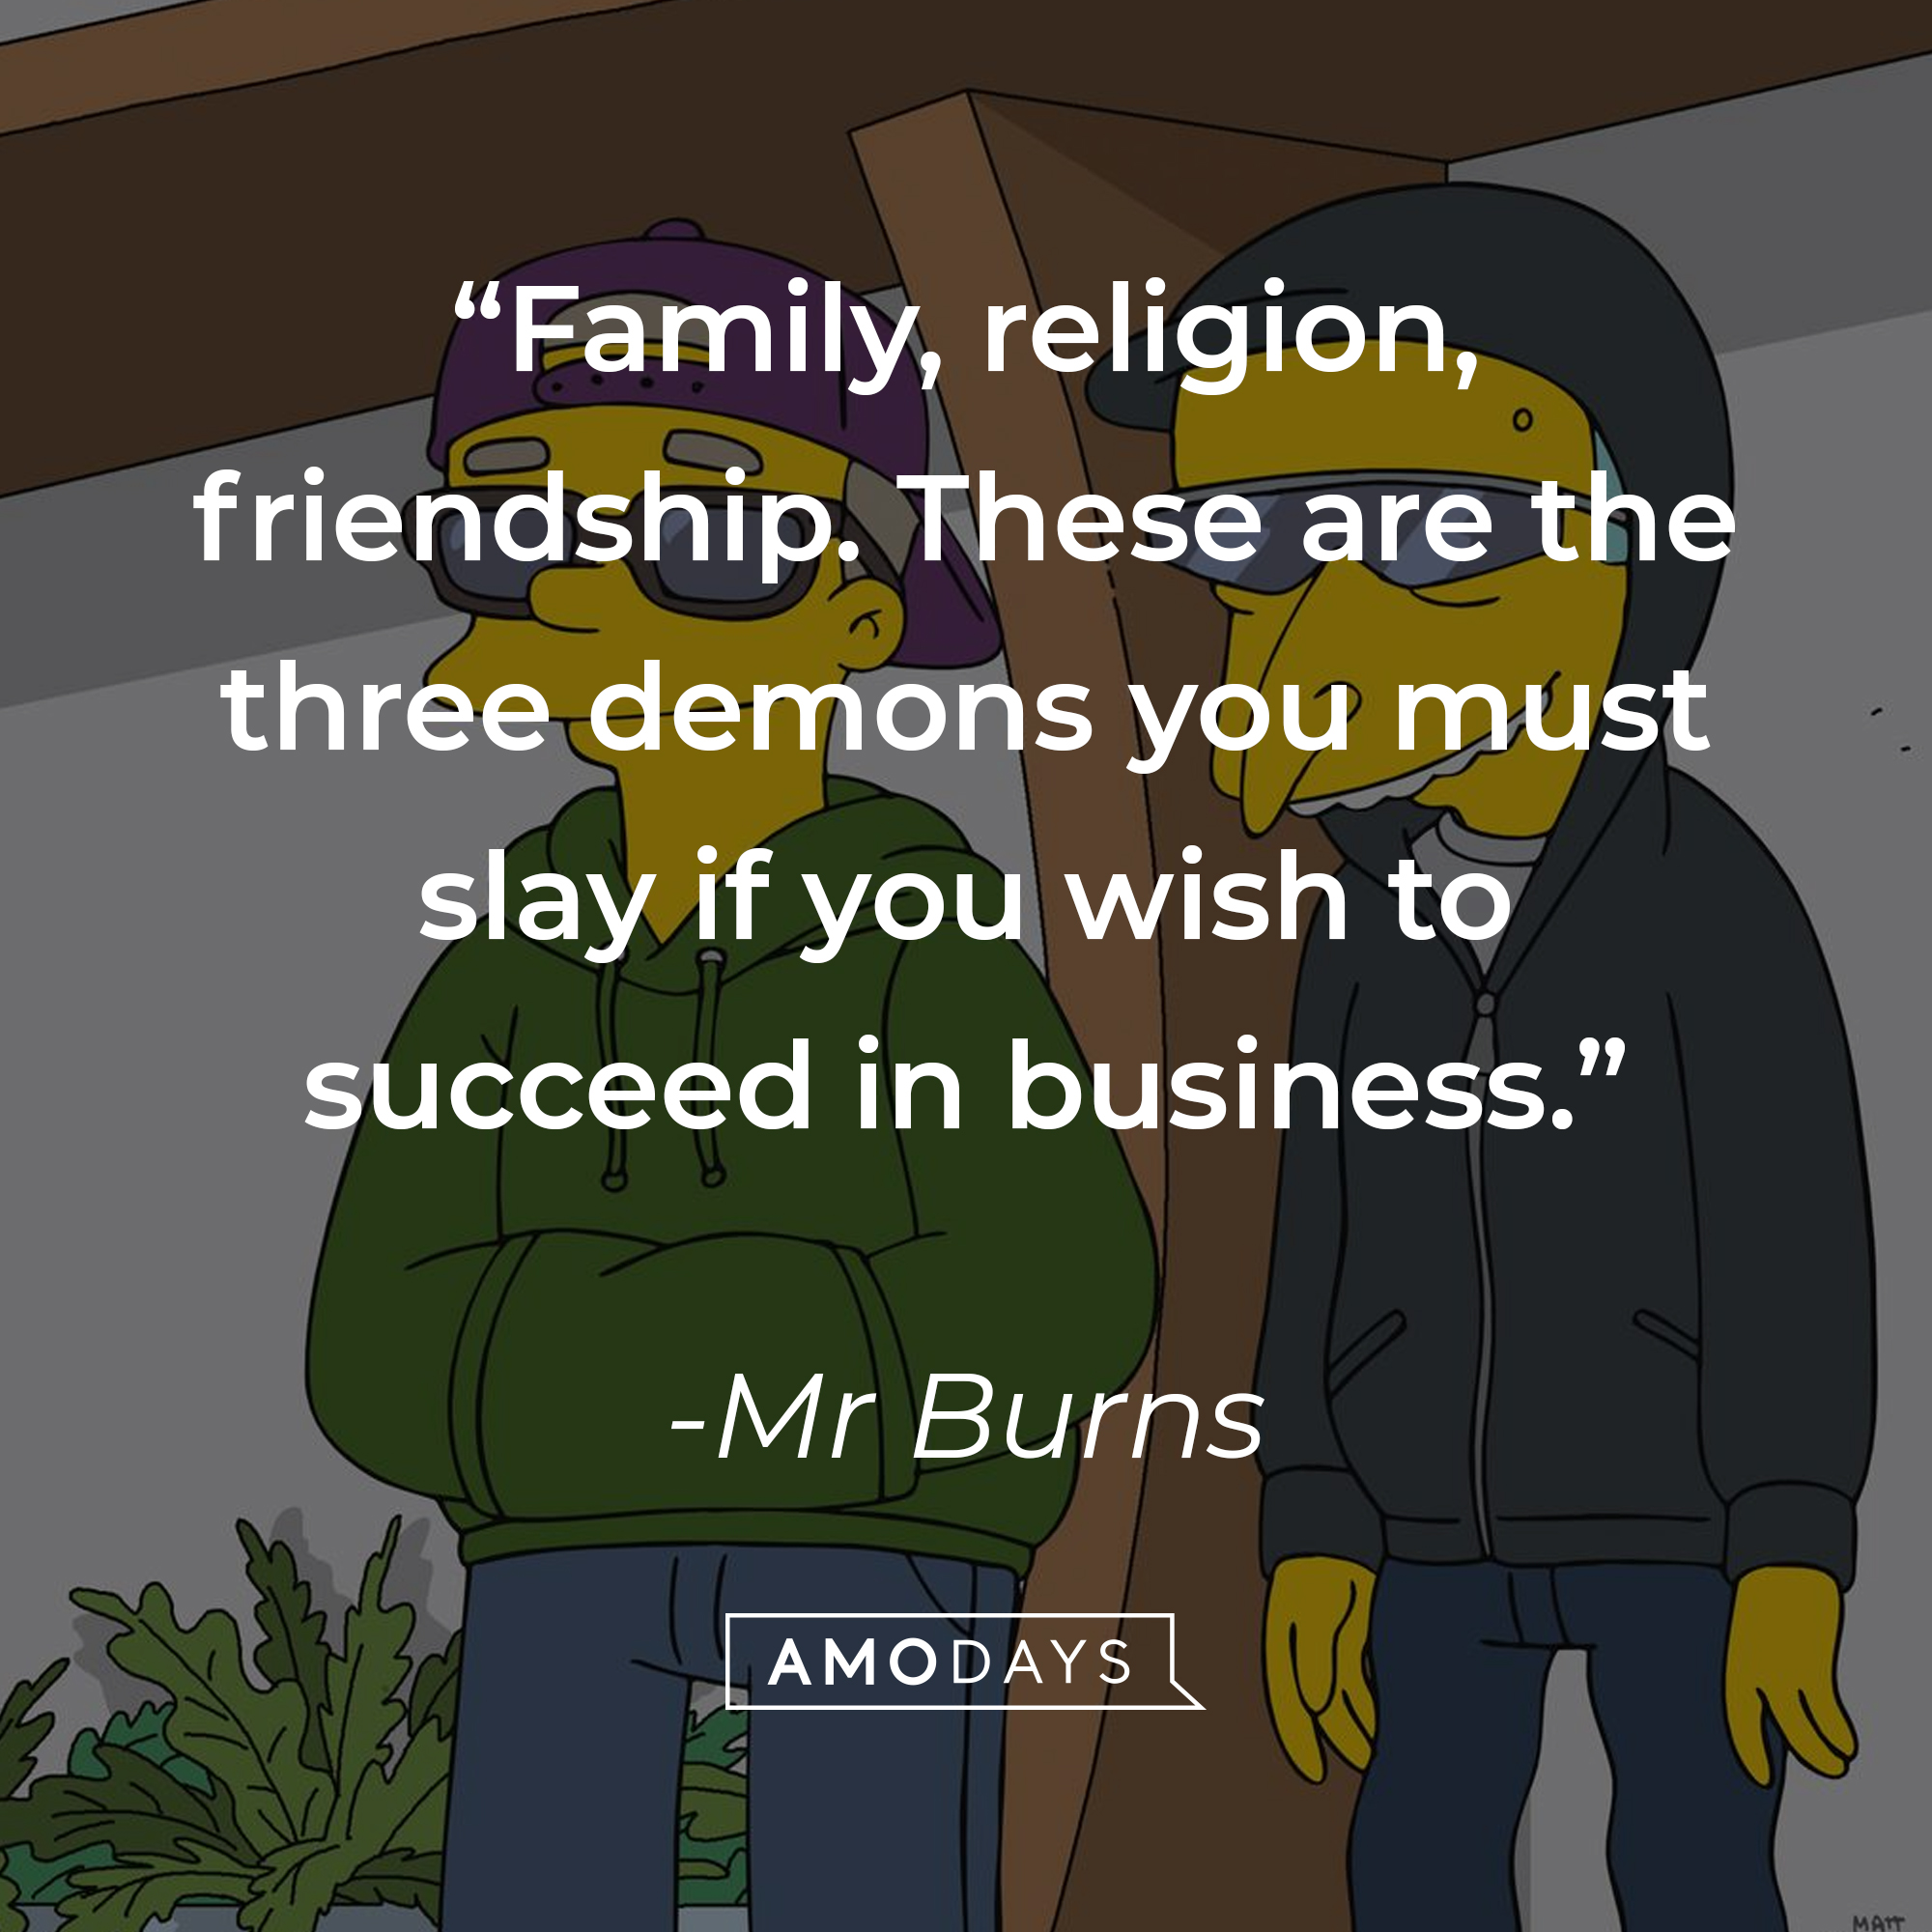 Mr. Burns' quote: "Family, religion, friendship. These are the three demons you must slay if you wish to succeed in business." | Source: facebook.com/TheSimpsons